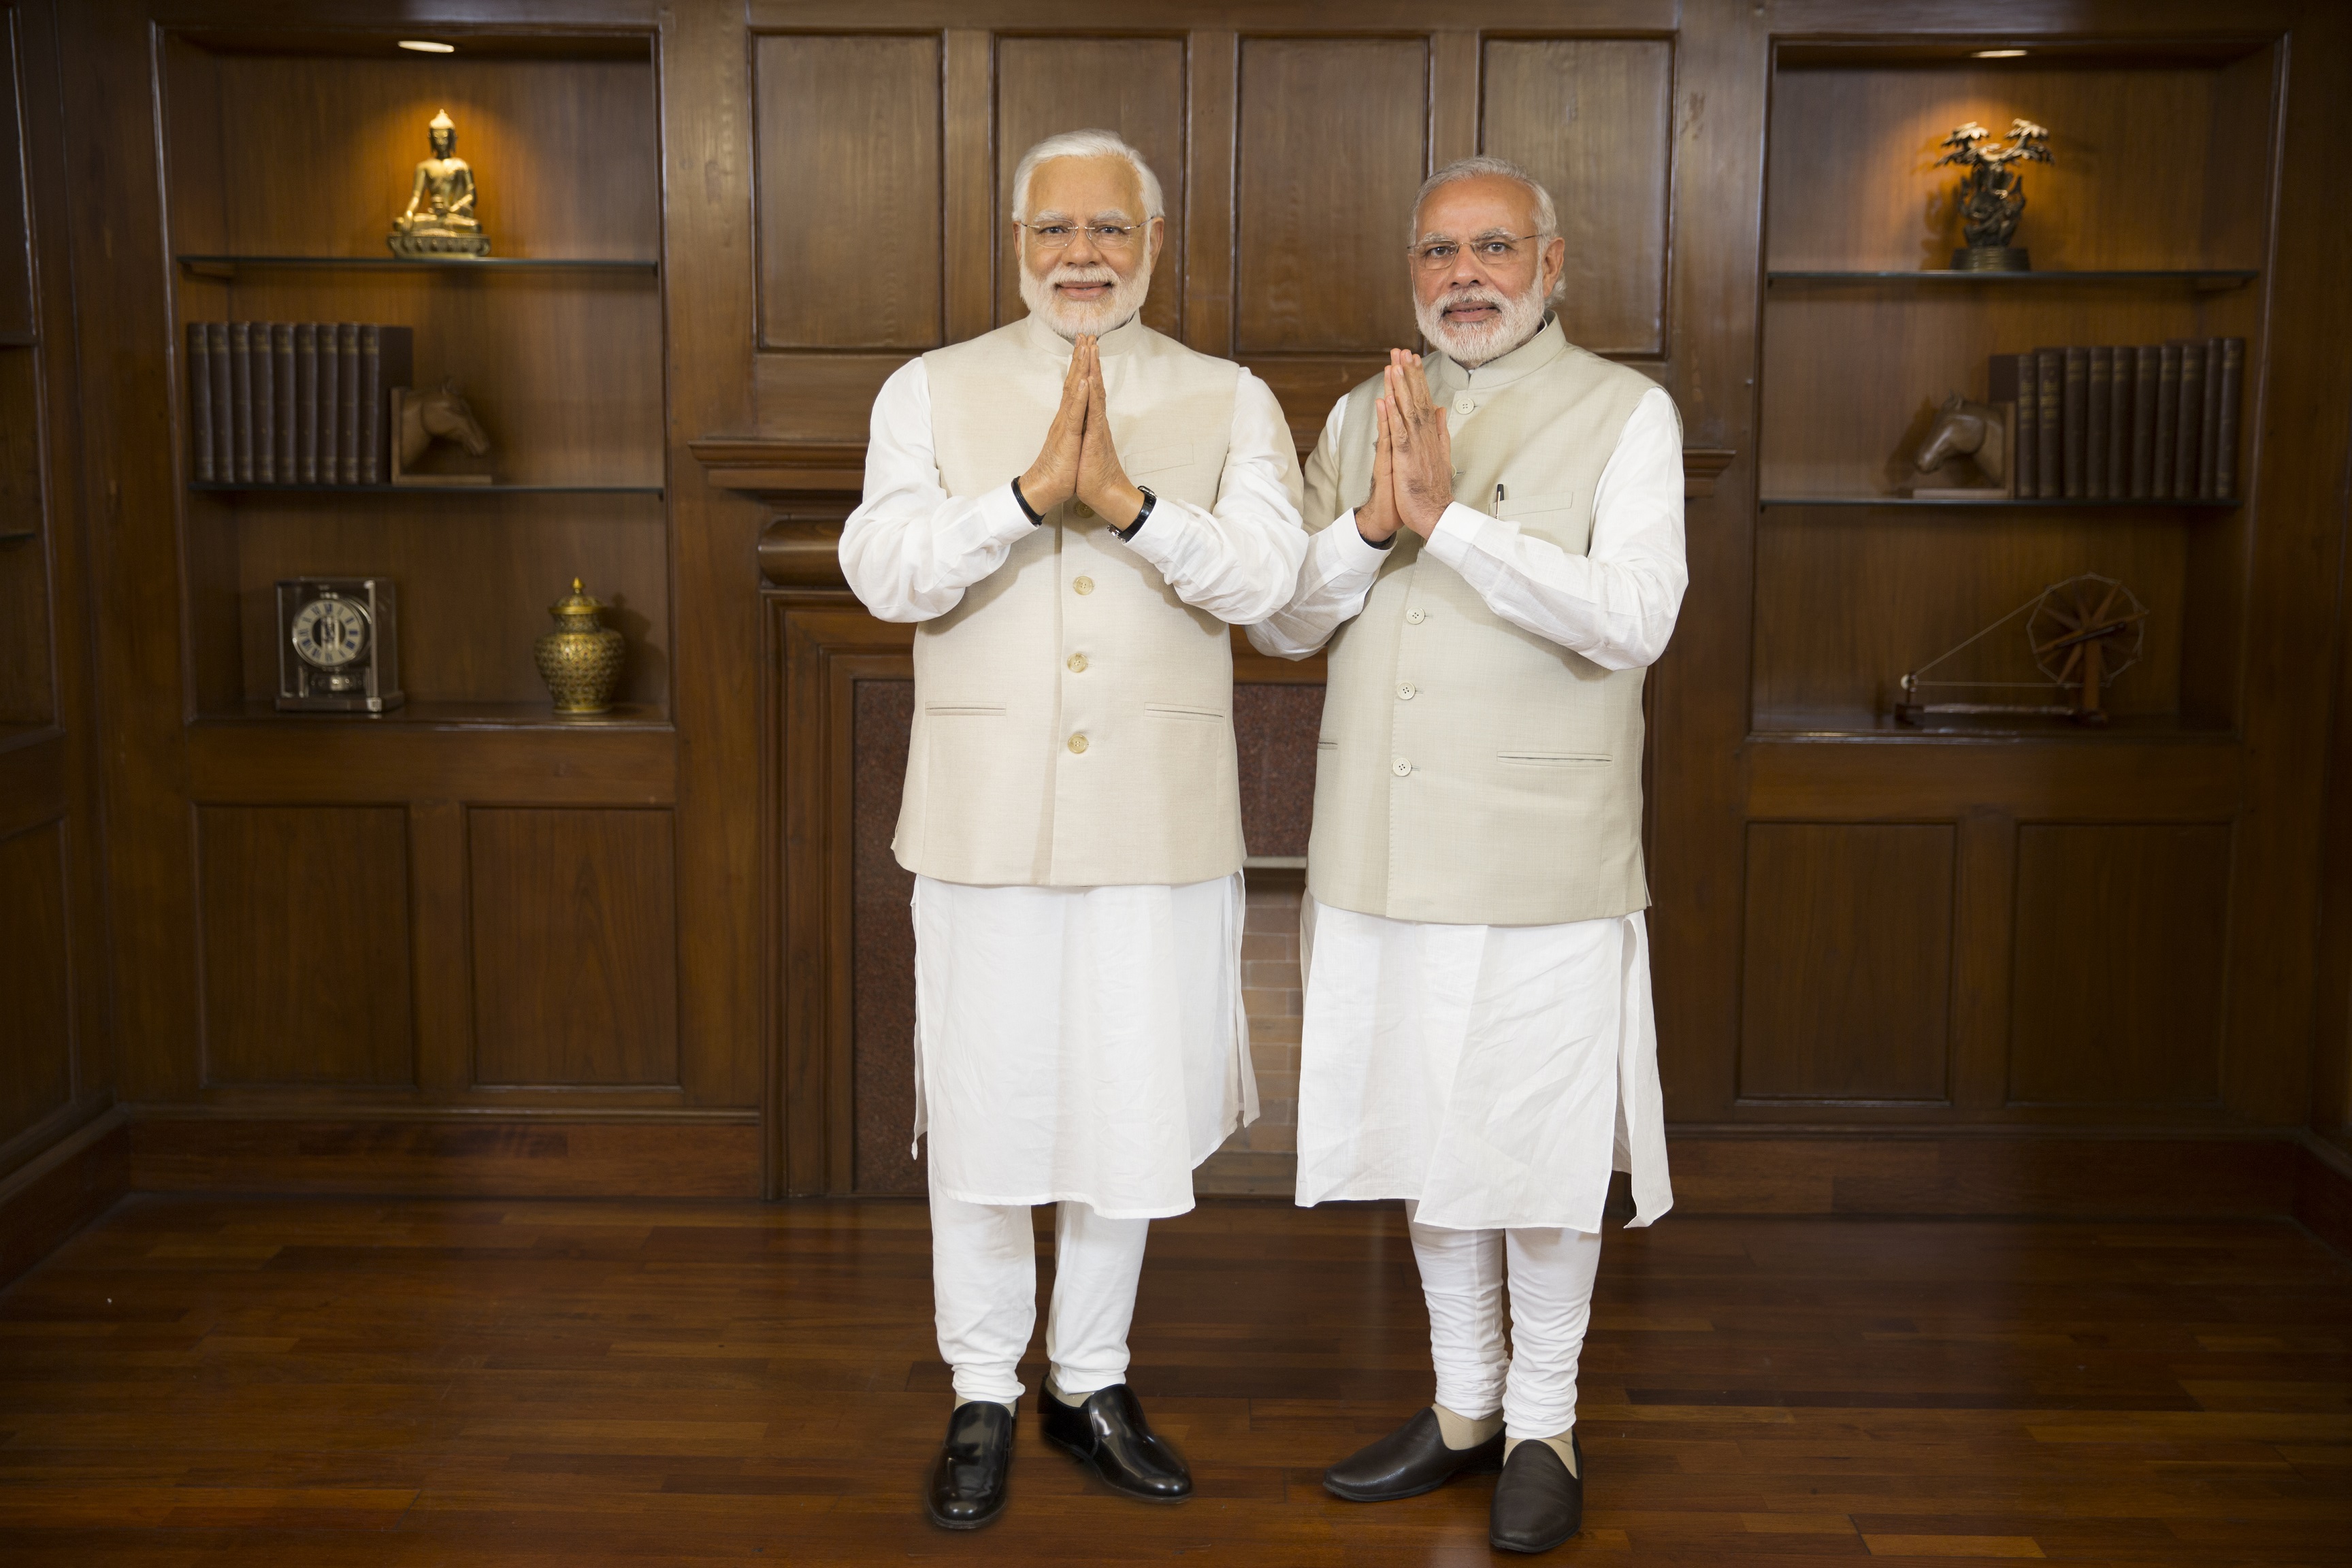 Side-by-side unveiling of Indian PM Narendra Modi’s Wax figure in New Delhi in April 2016